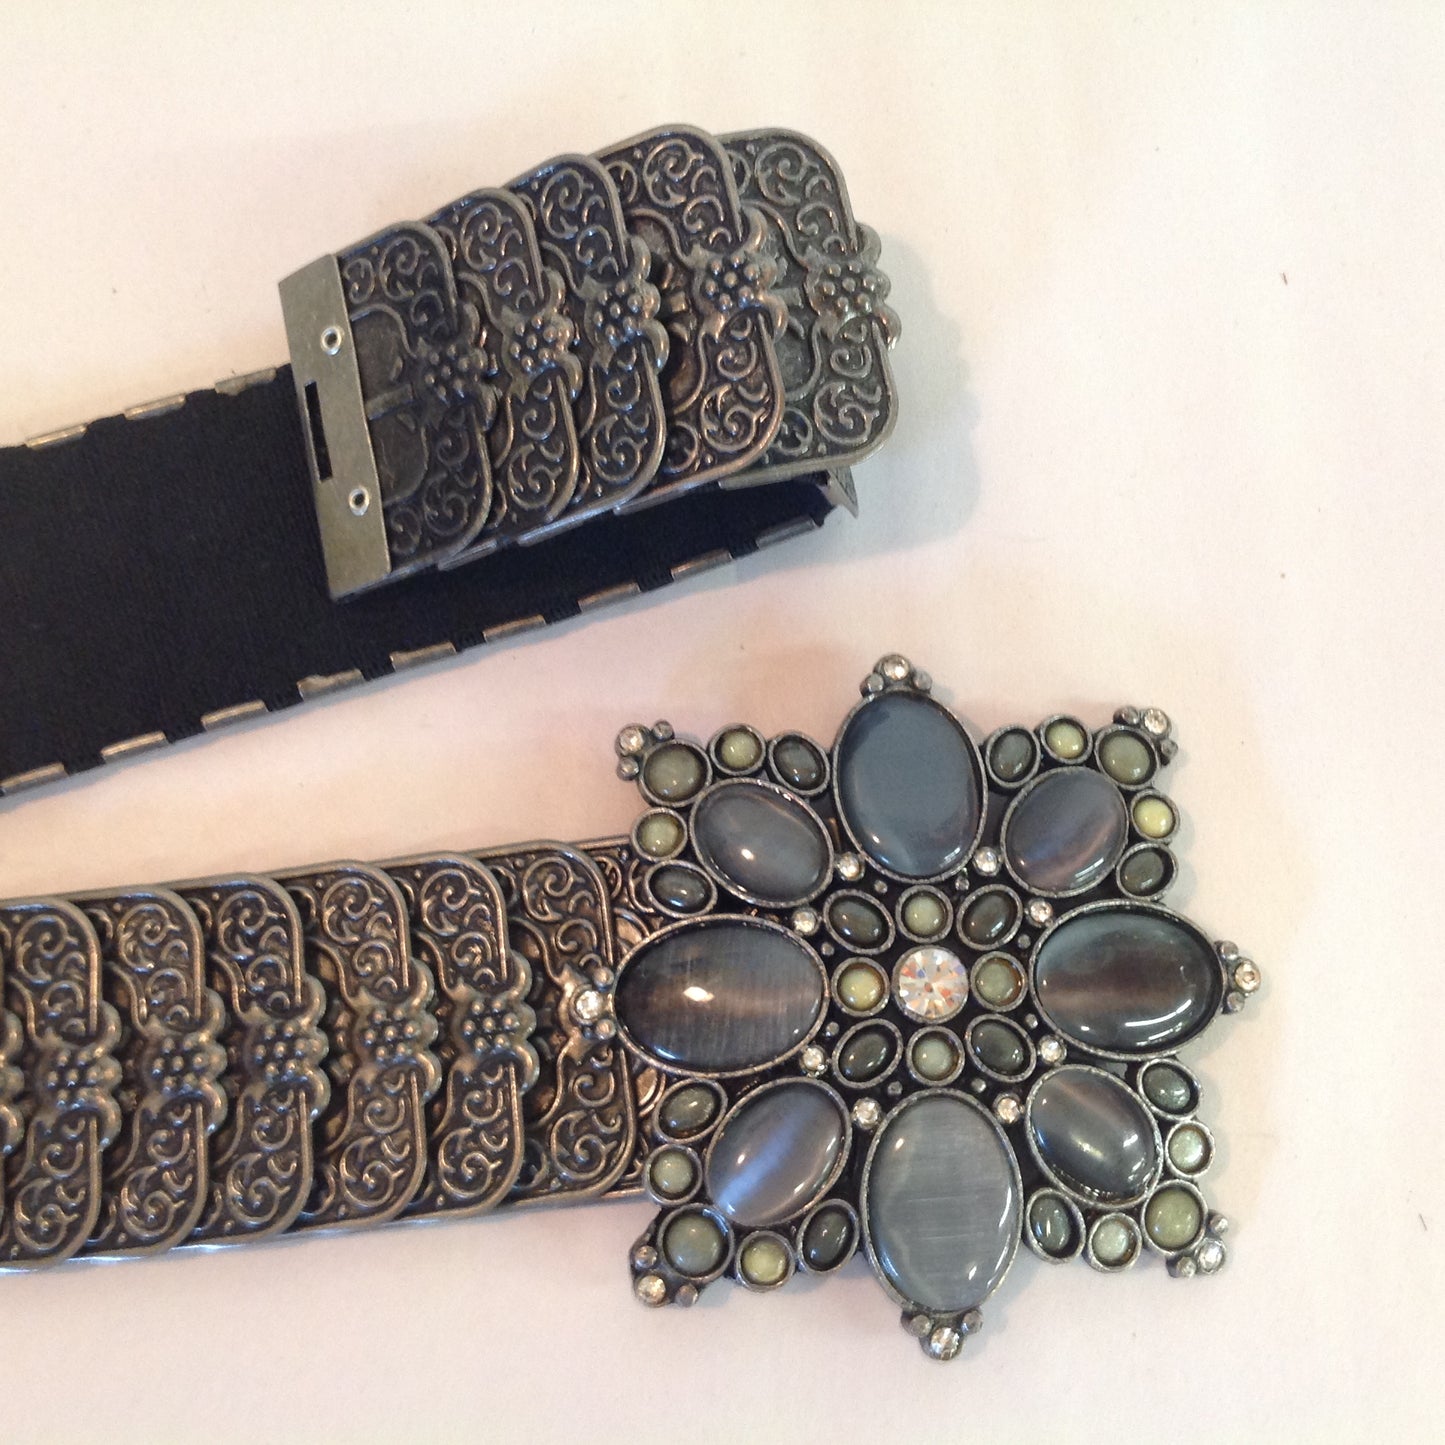 Vintage Women's Stretch Belt Reticulated Metal Filigree with Sun Blossom Grey Violet Glass Rhinestone Buckle 29